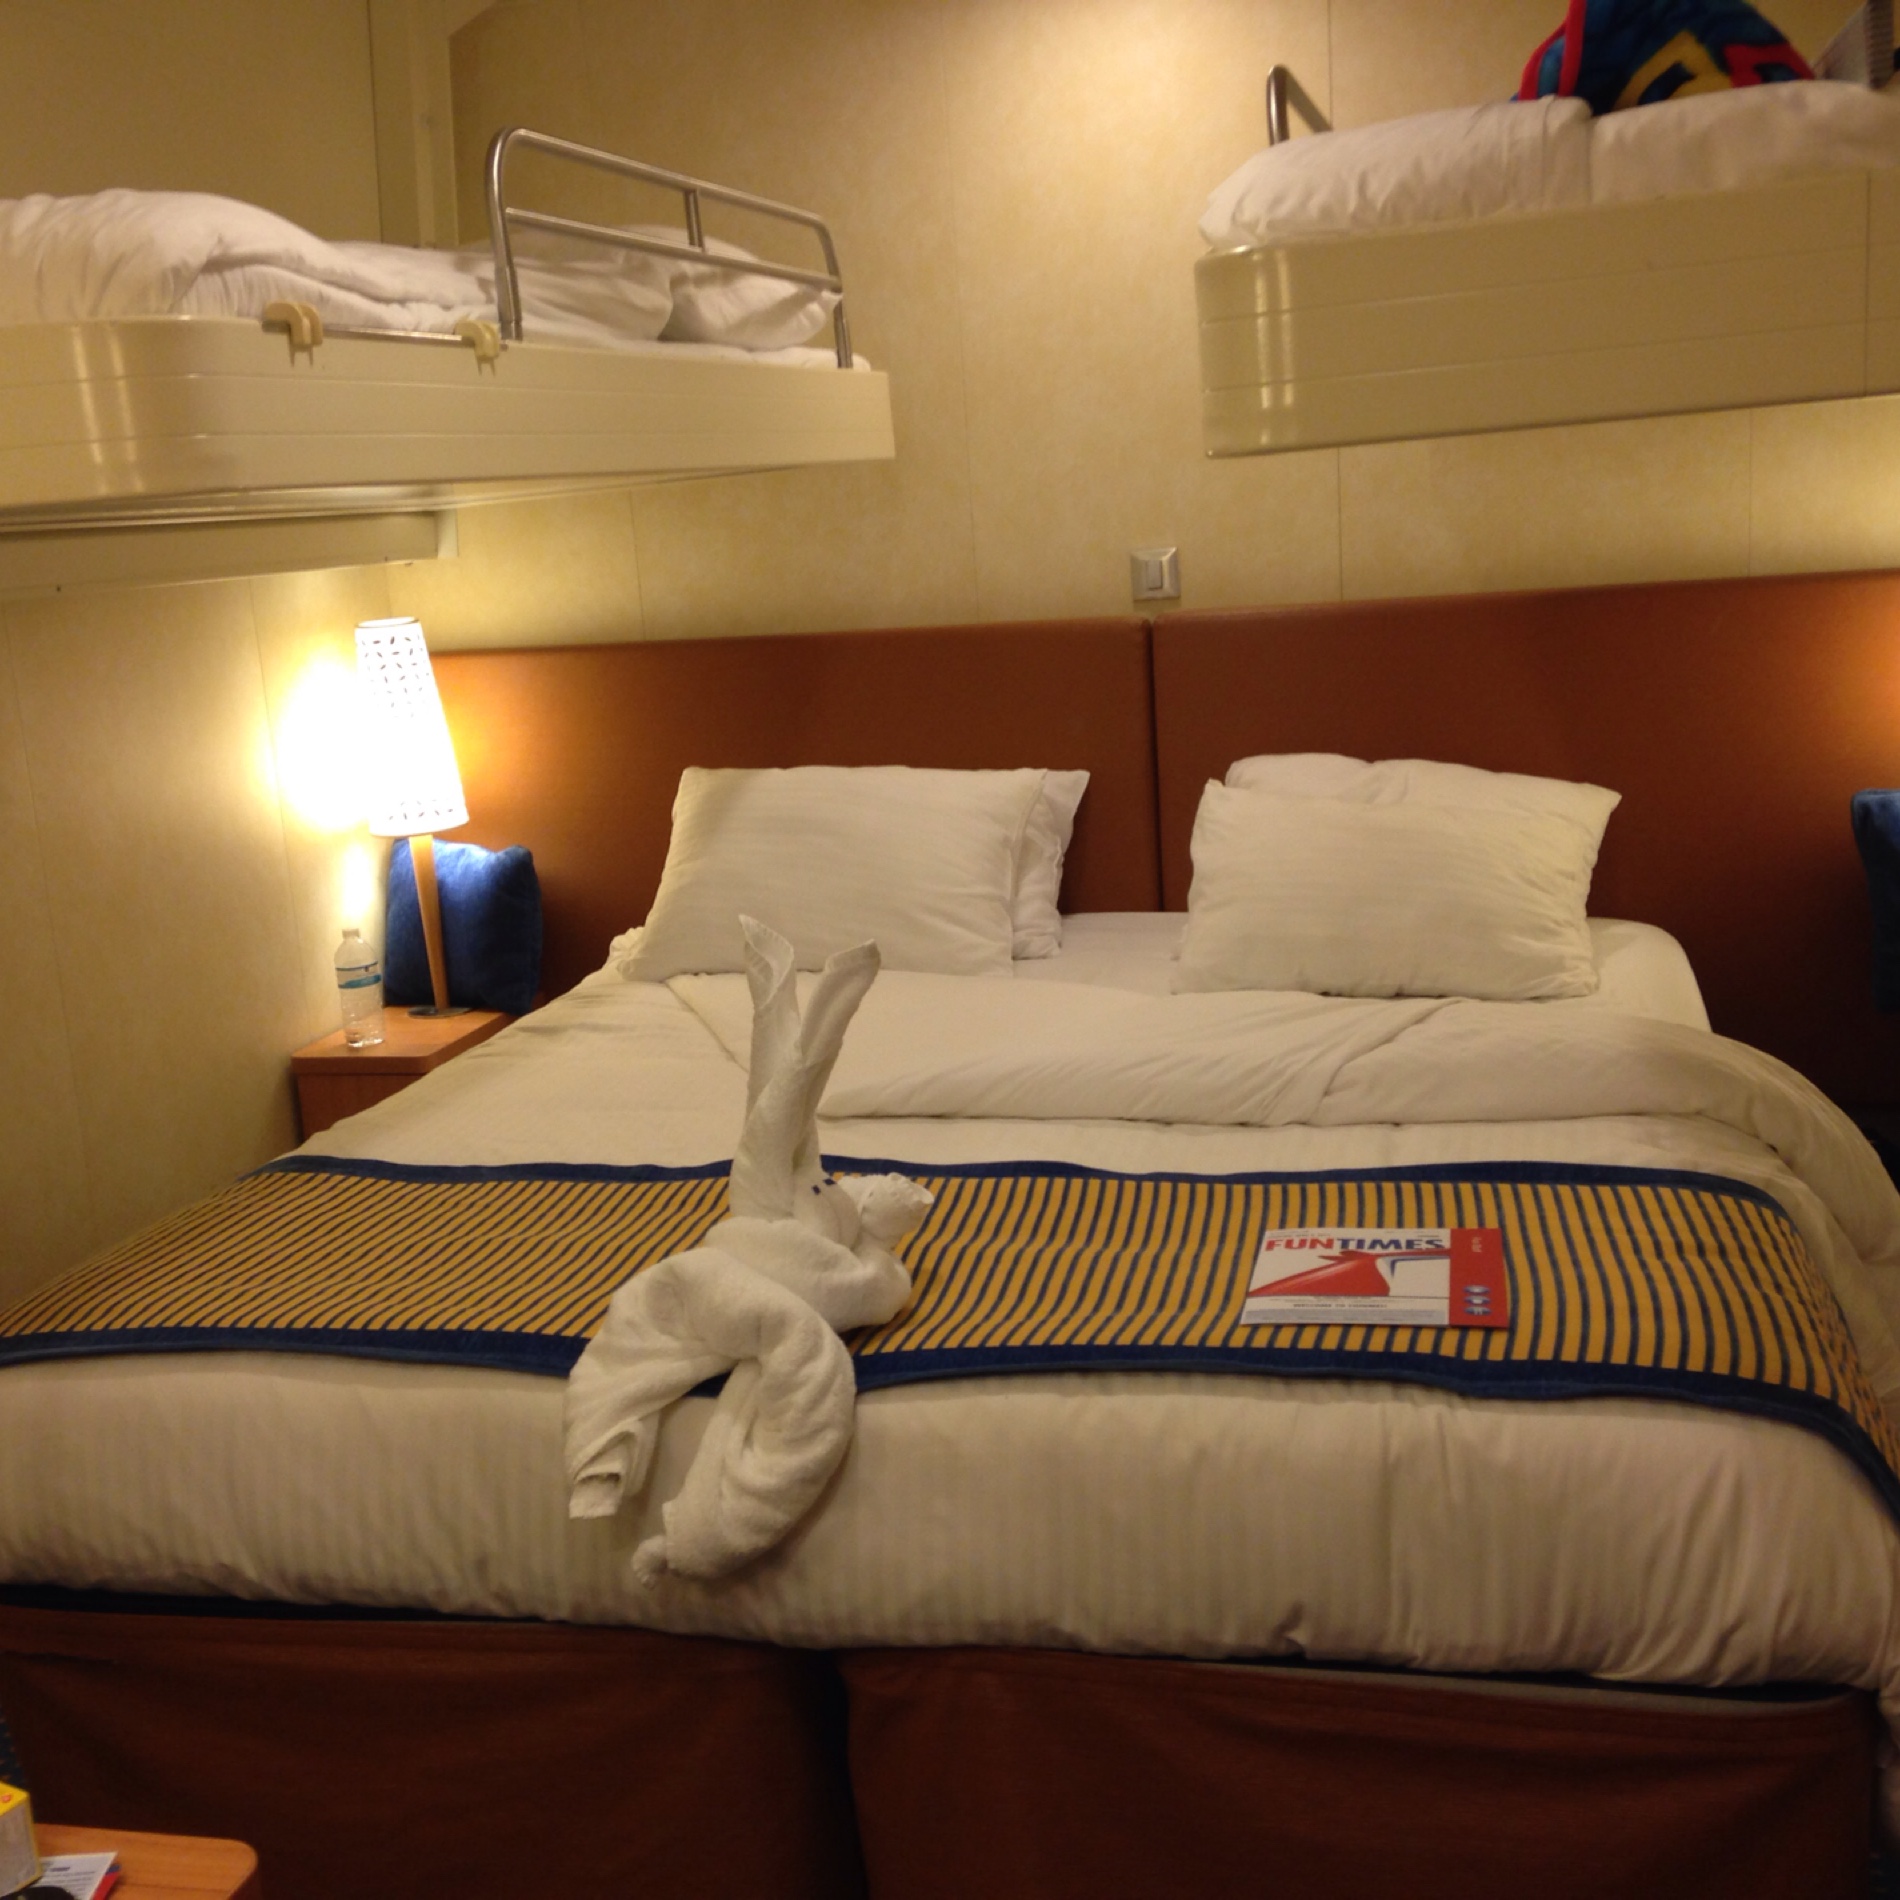 stateroom on carnival cruise ship